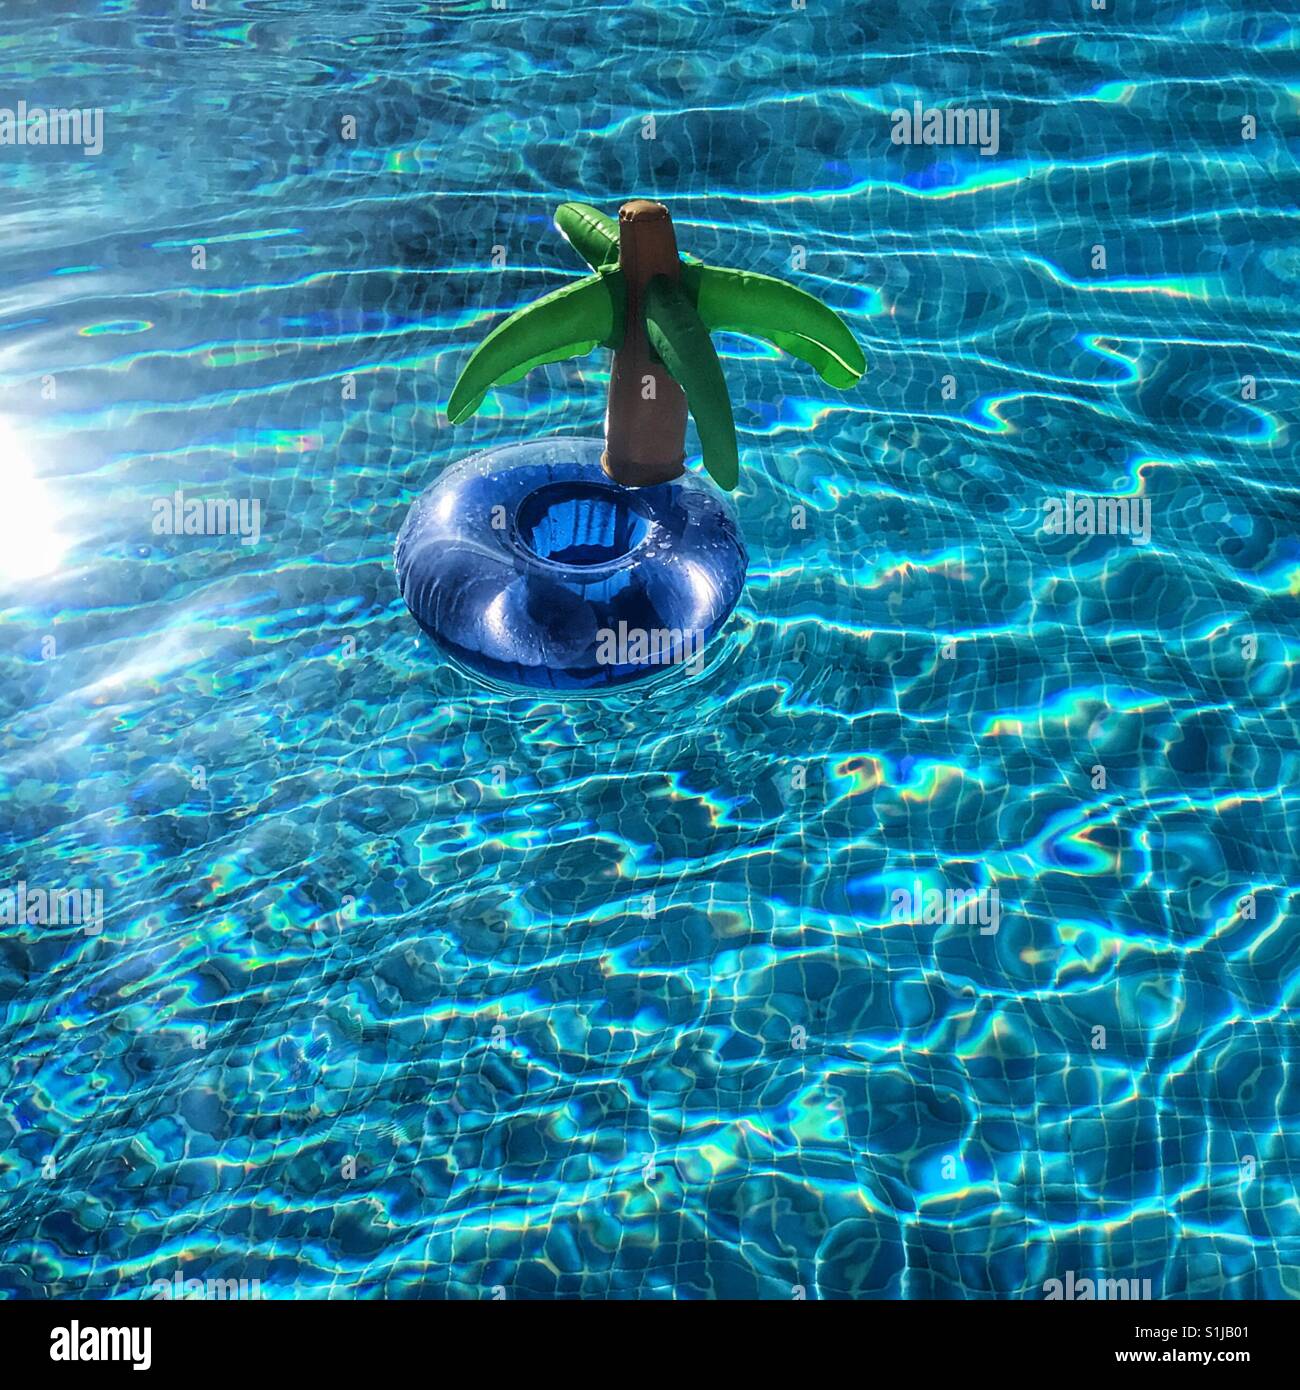 Inflatable palm tree island floating in sunny blue swimming pool Stock Photo